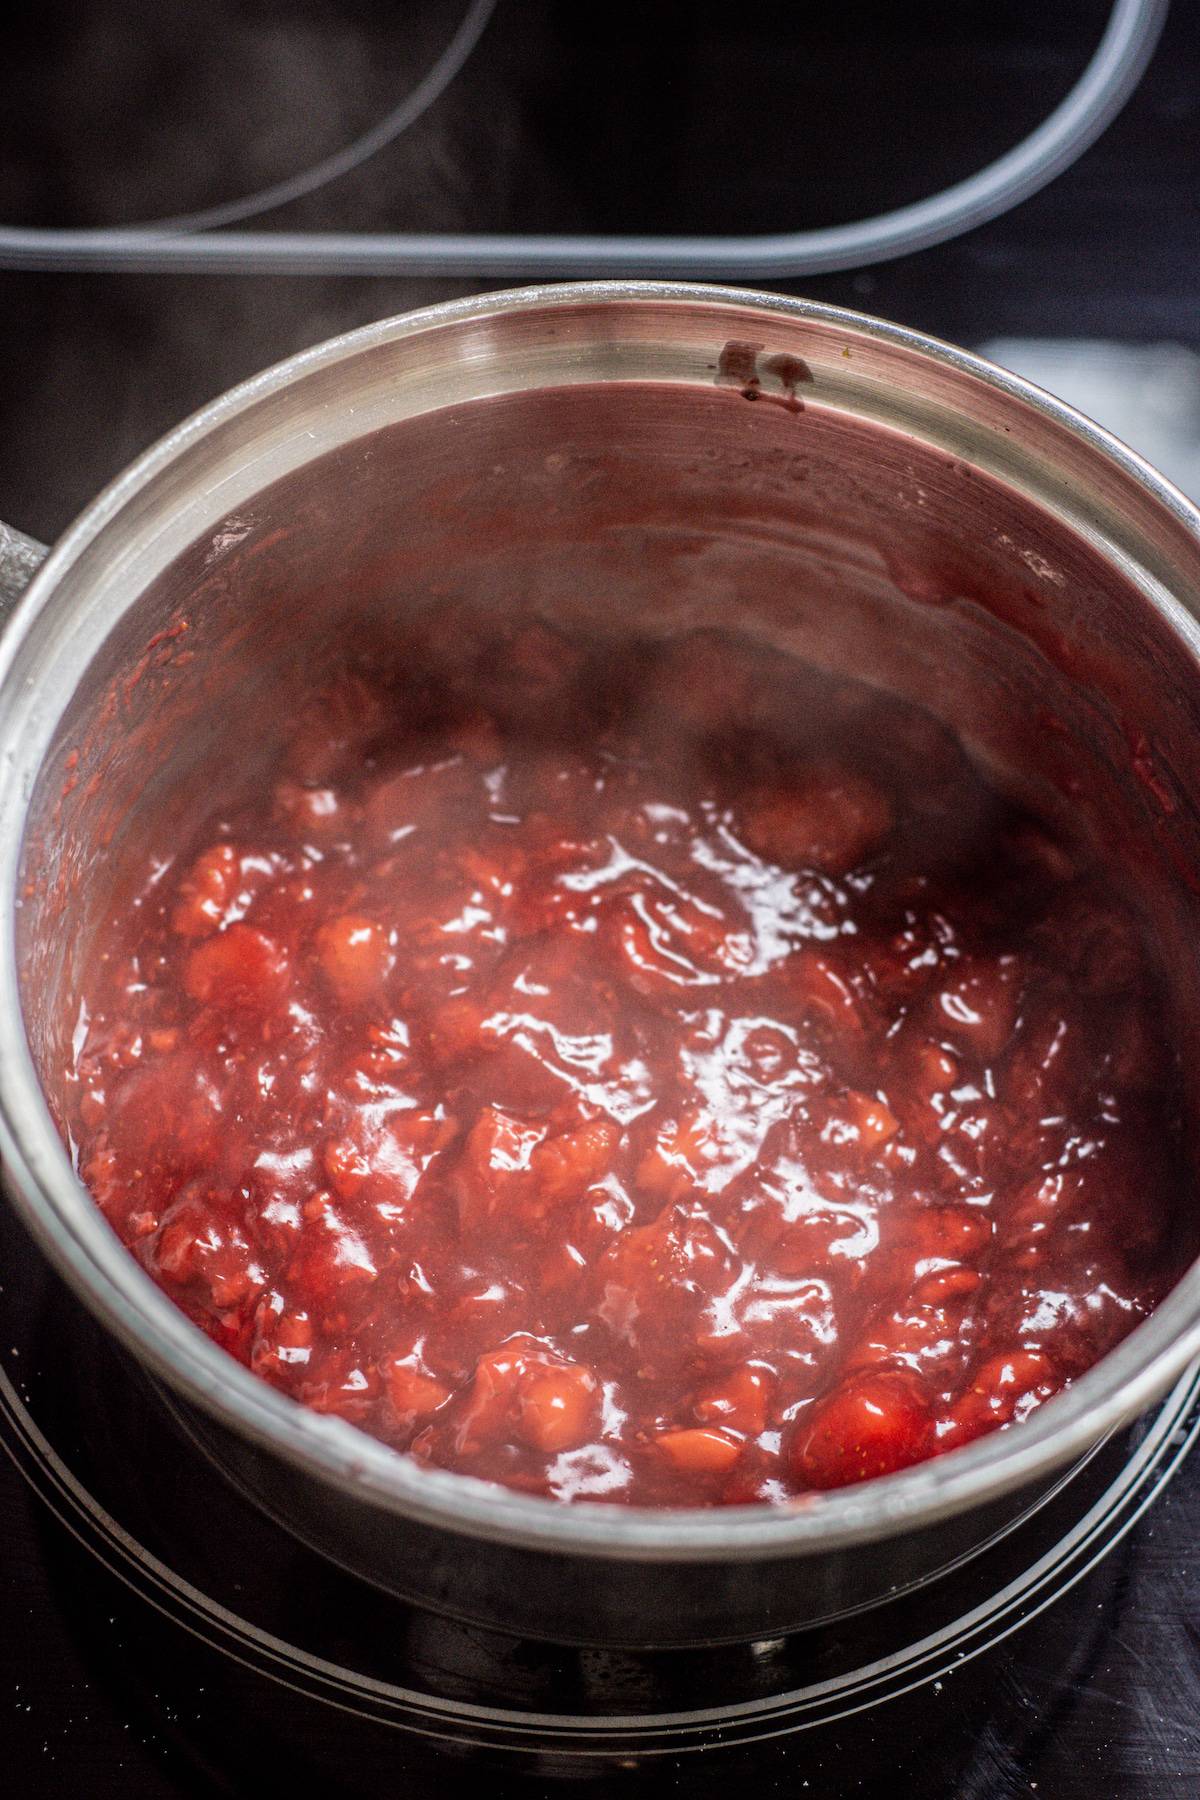 Strawberry filling being cooked in a pan.